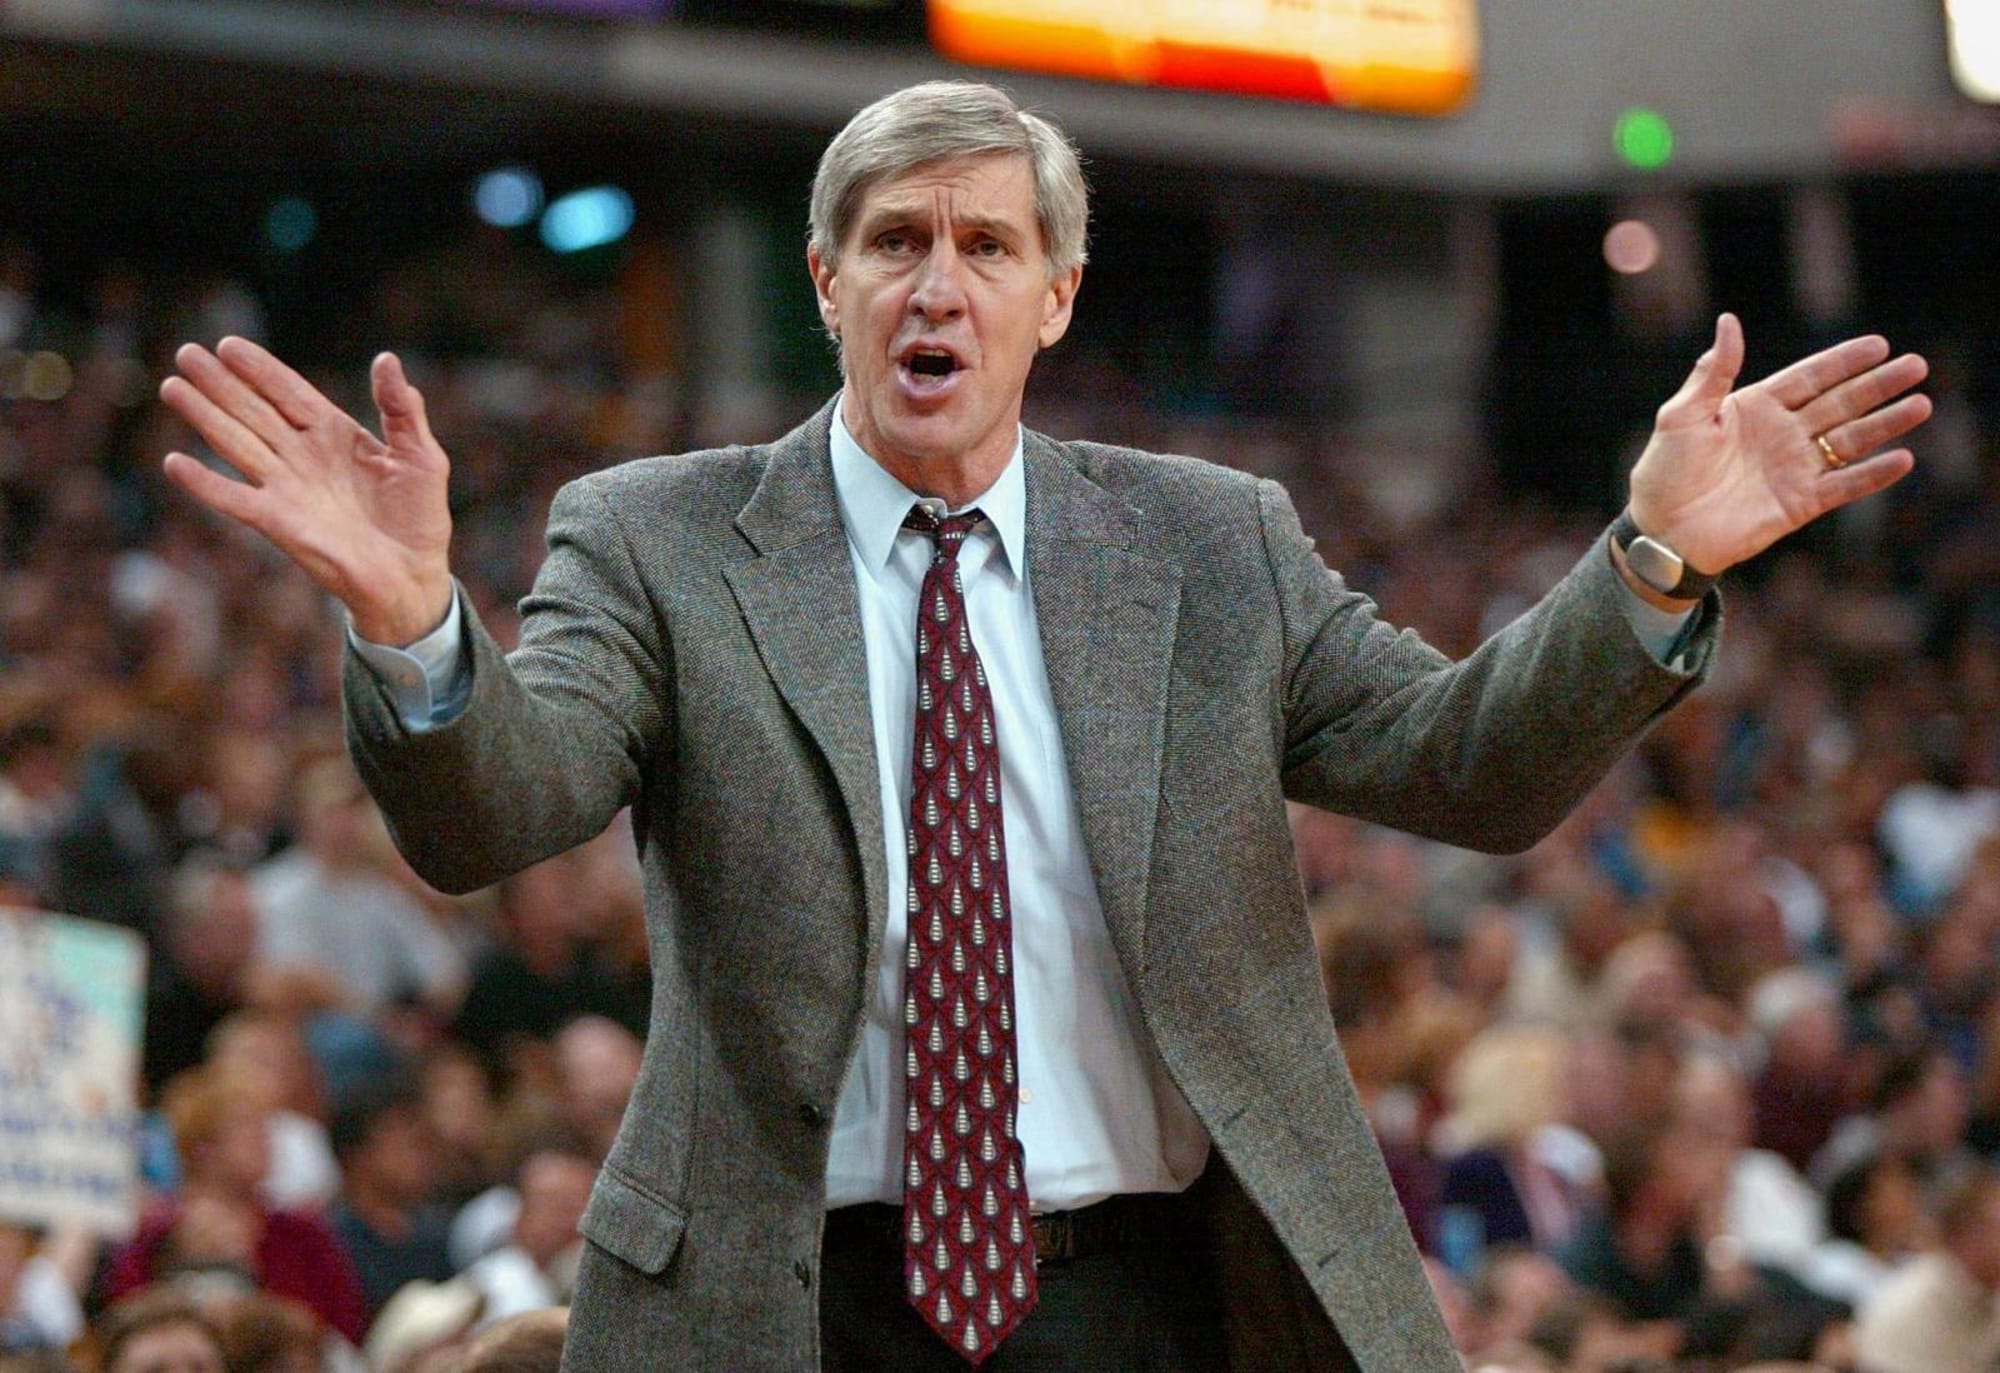 Many from the Bulls & NBA reflect fondly on the life of Jerry Sloan